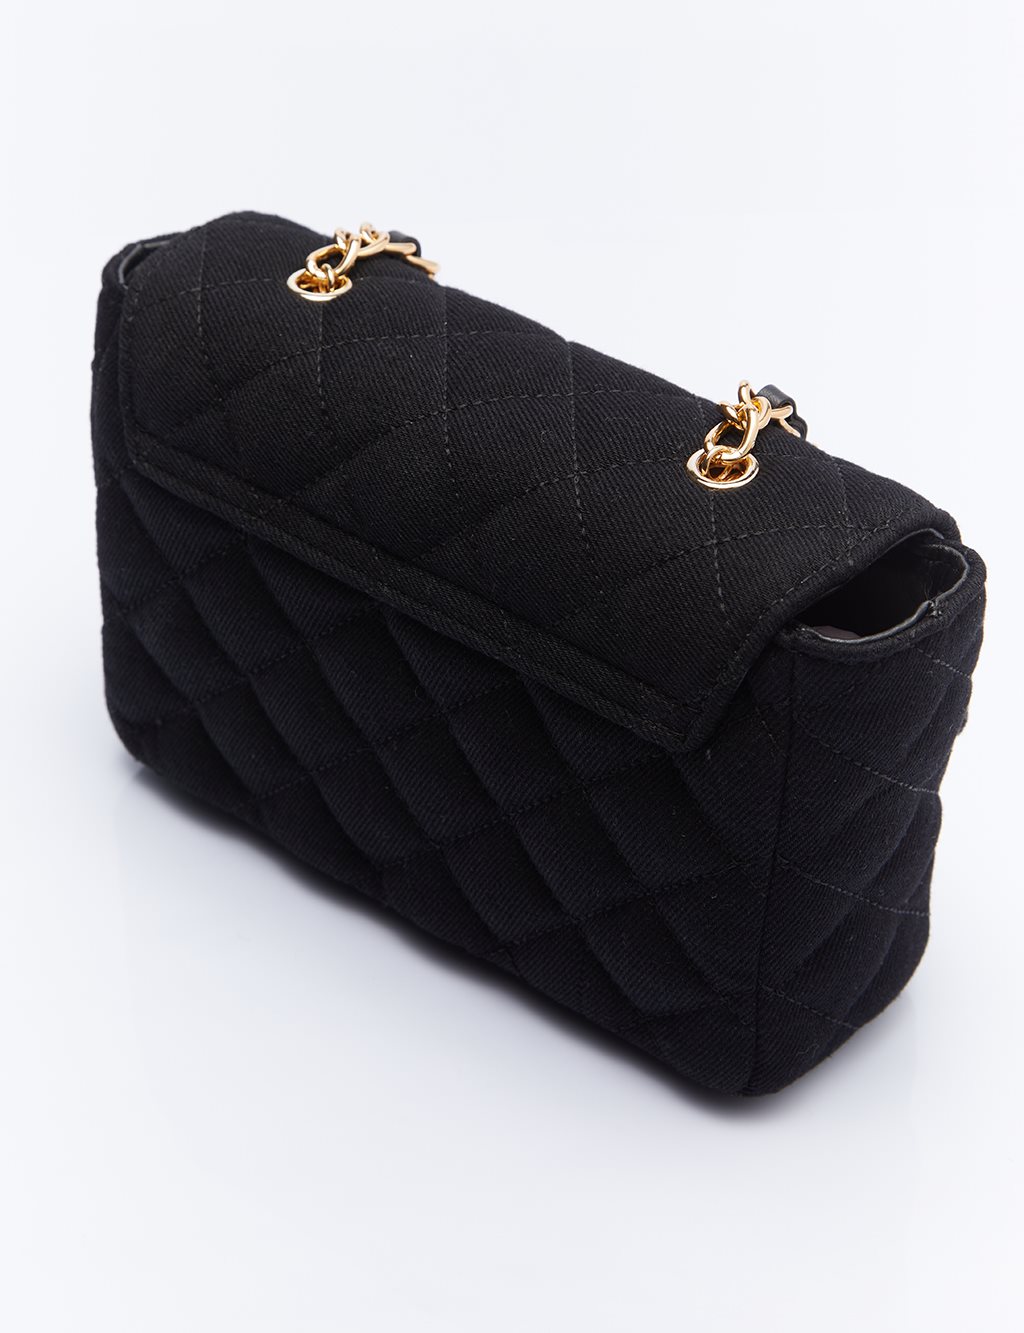 Covered Fabric Bag in Black